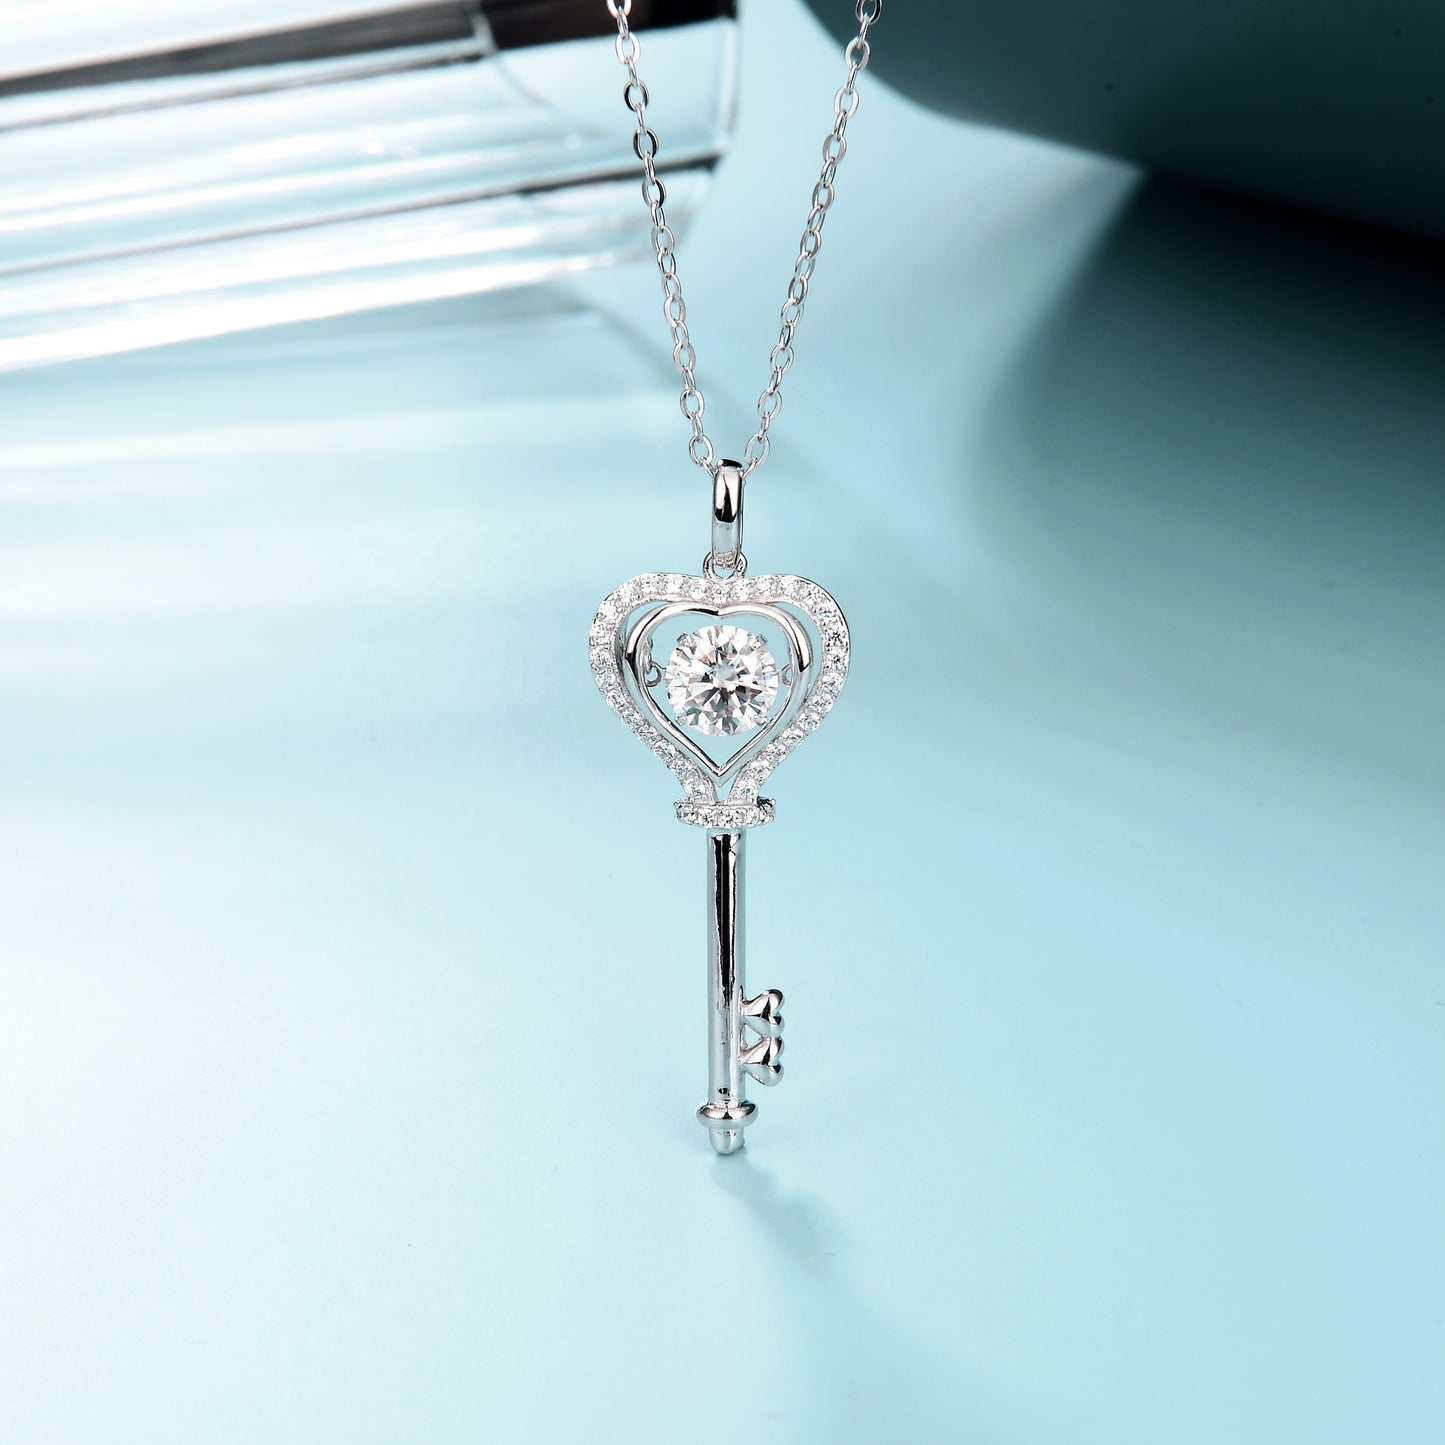 Key And Stone Pendant With A Moissanite Diamond front view